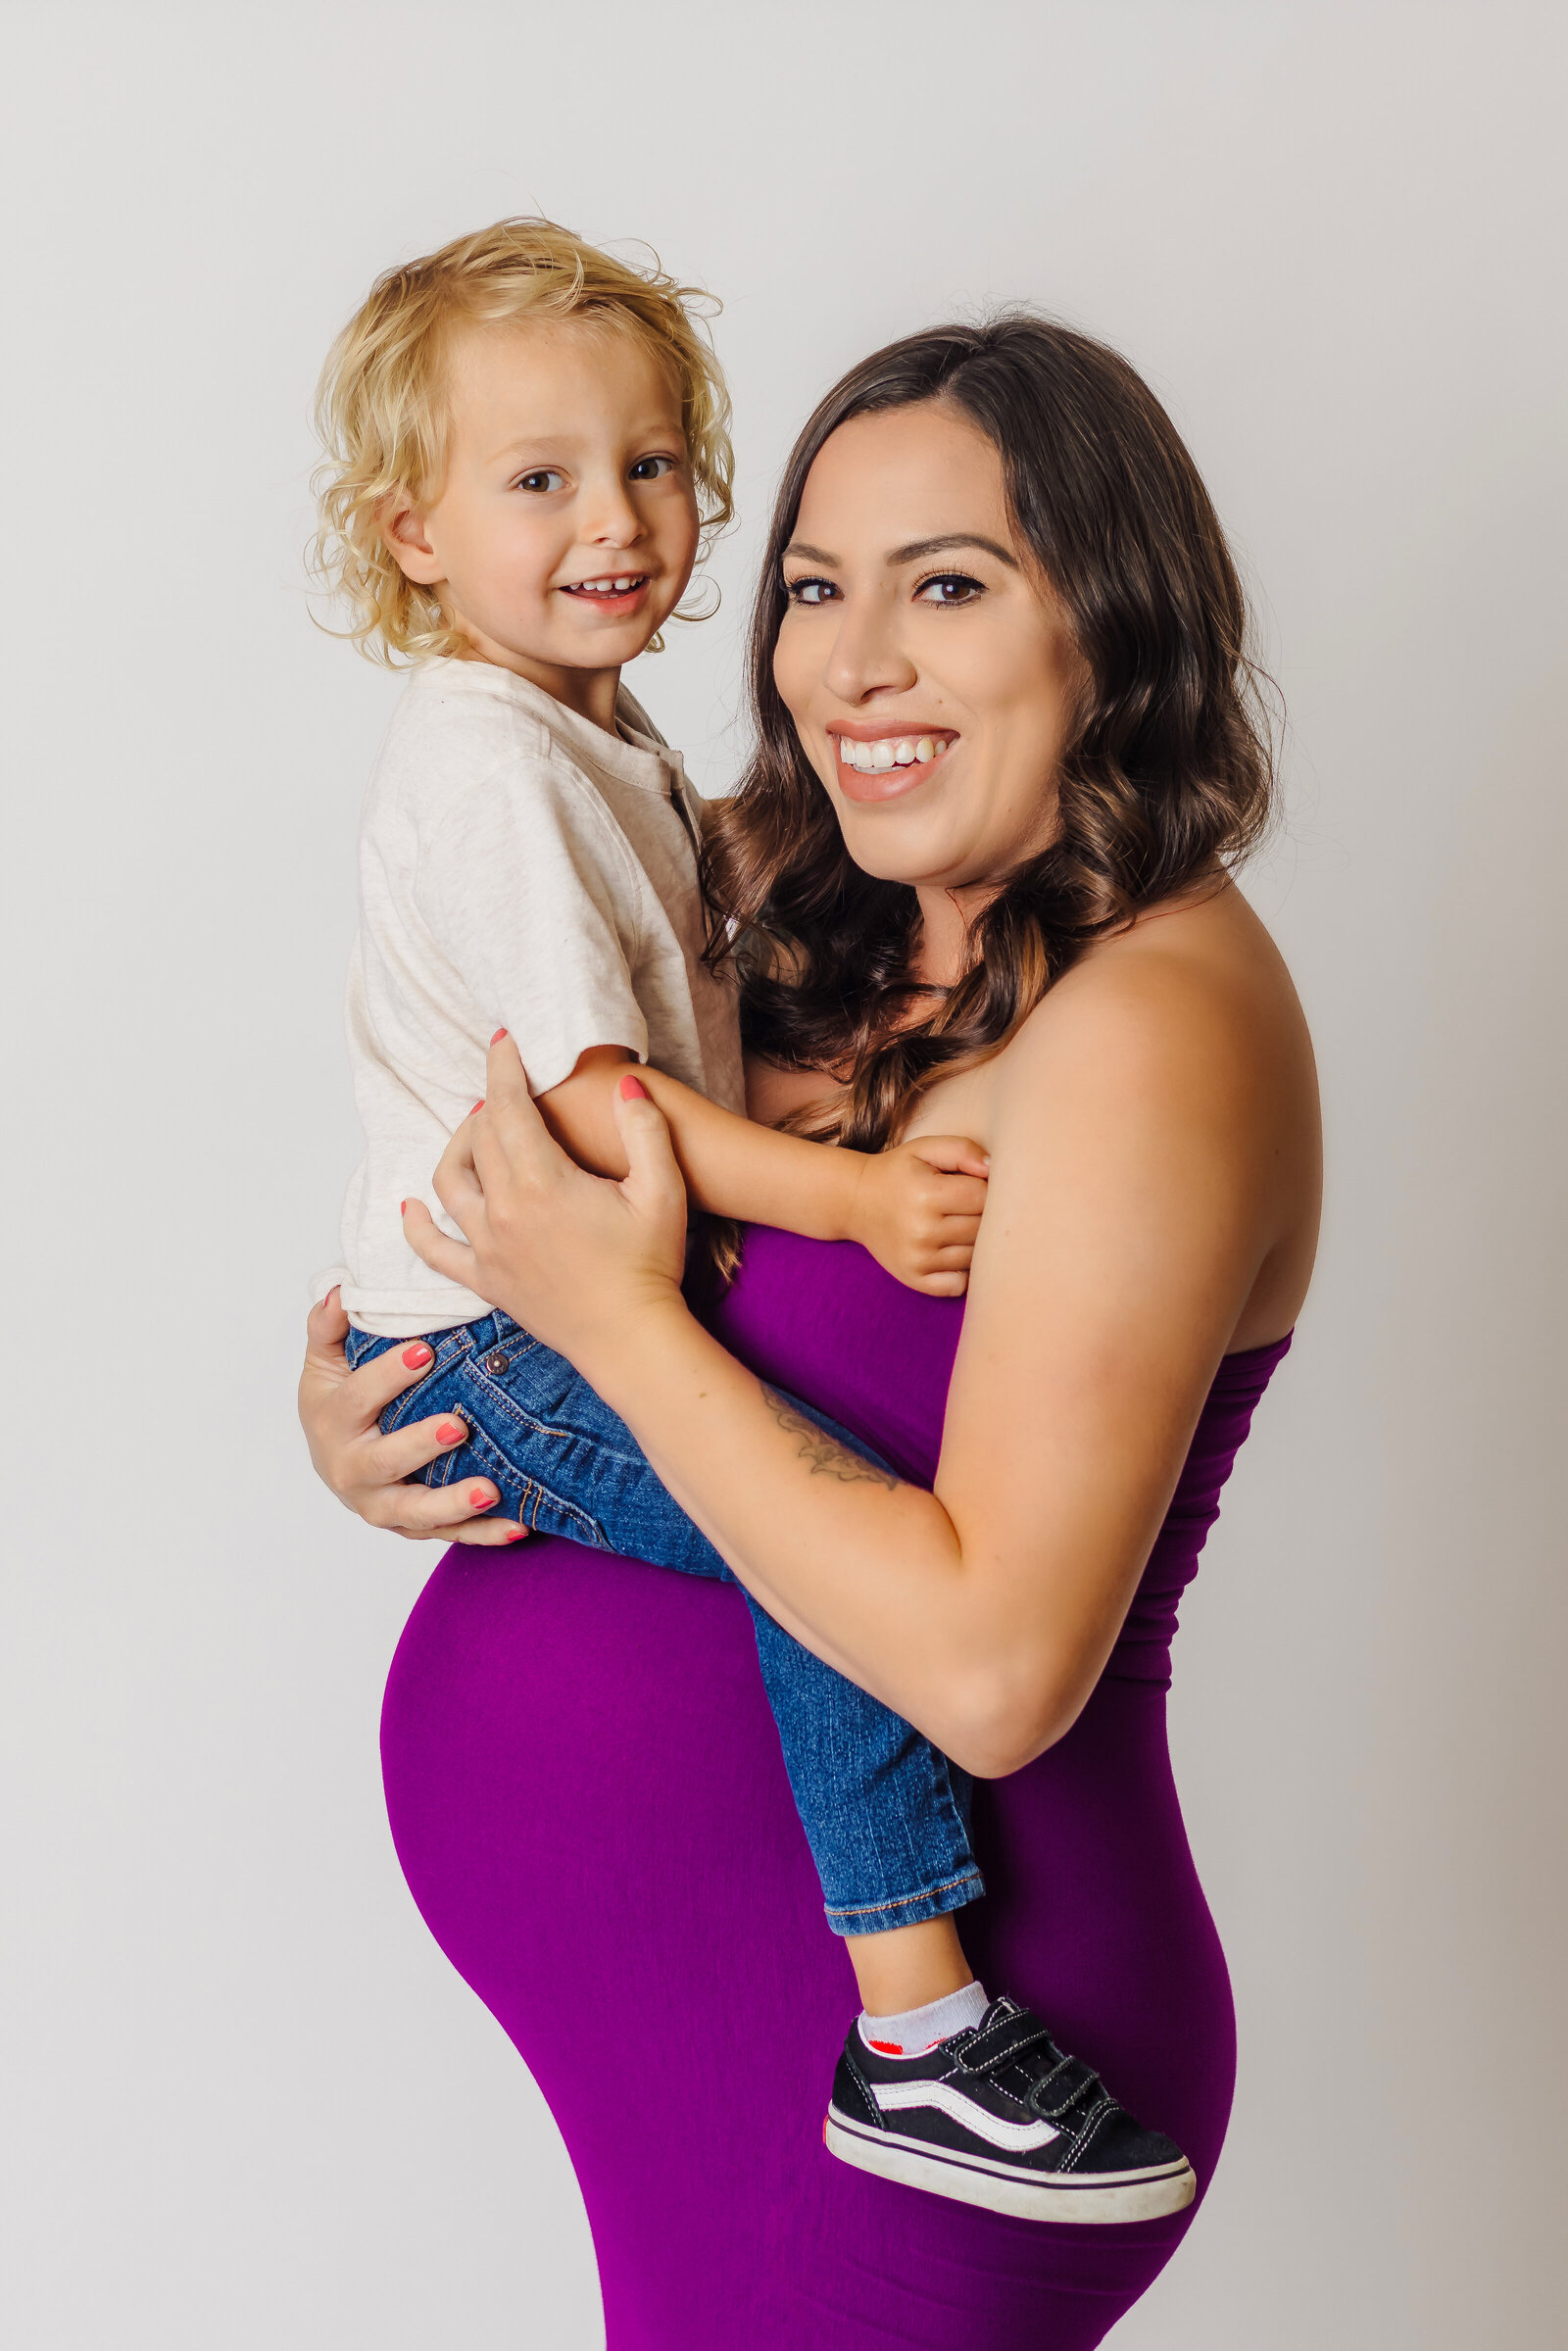 Maternity Photographer, a mother-to-be holds her young child